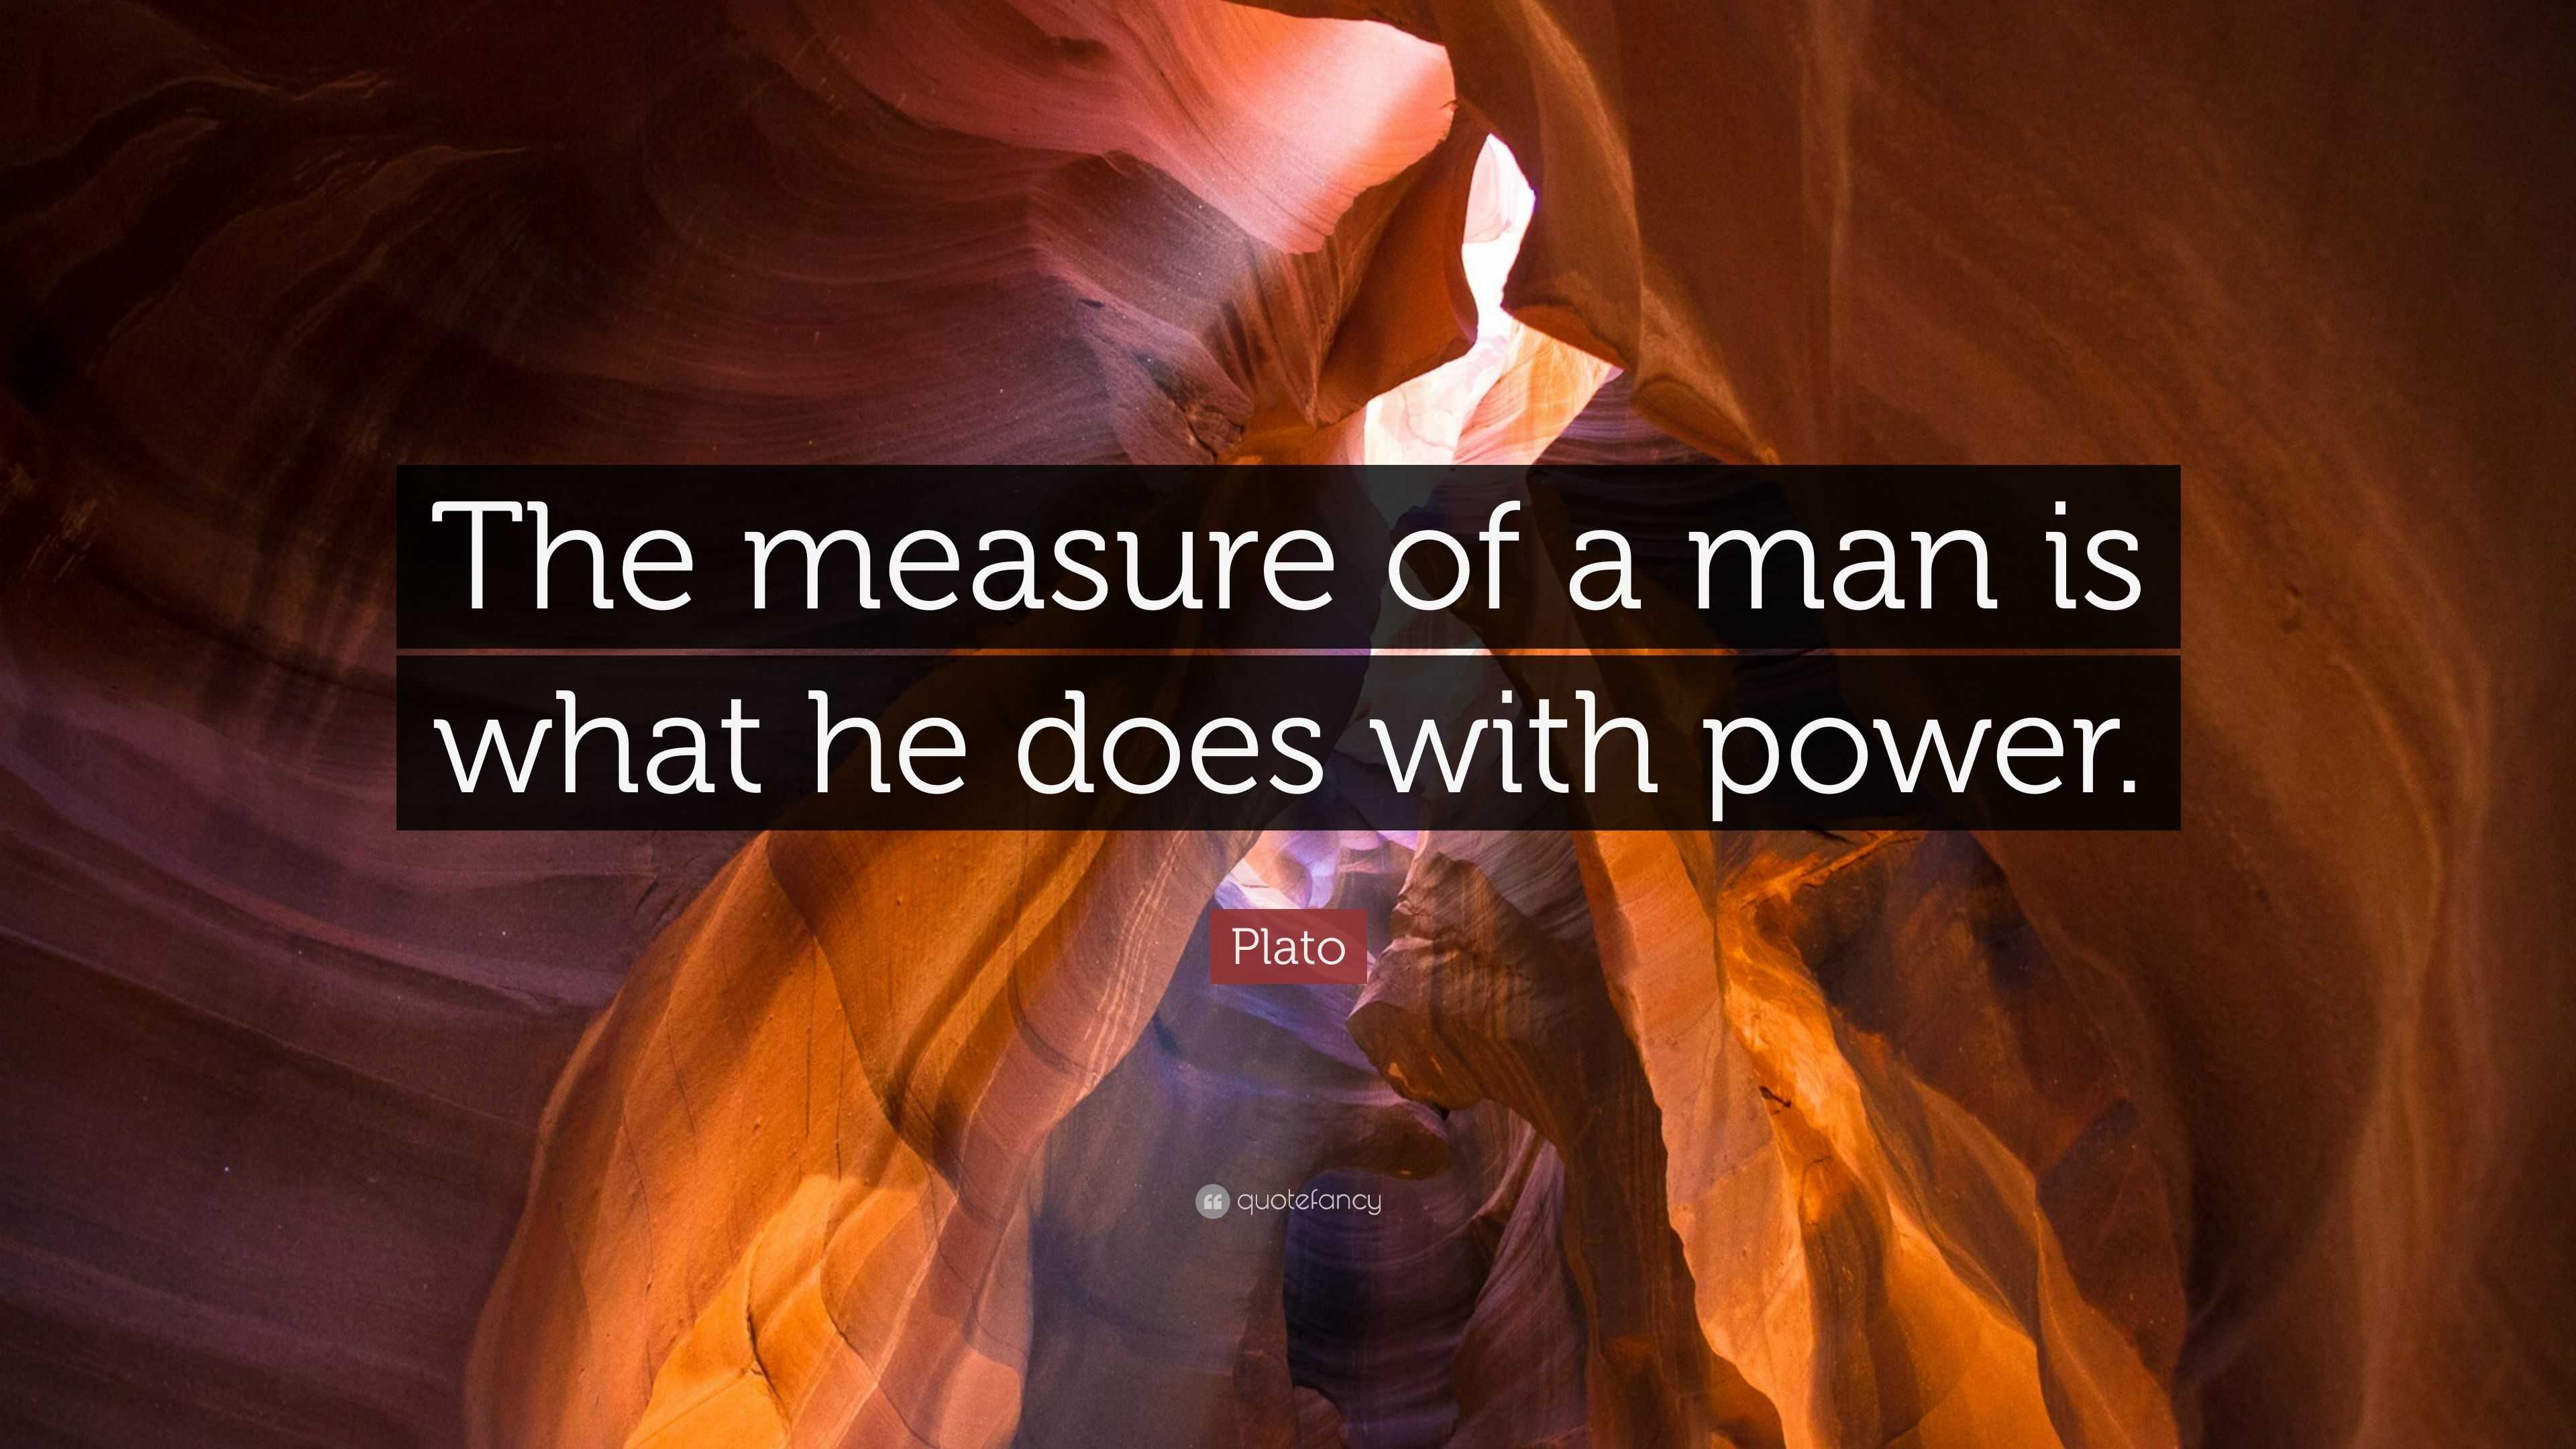 Plato Quote: “The measure of a man is what he does with power.” (17